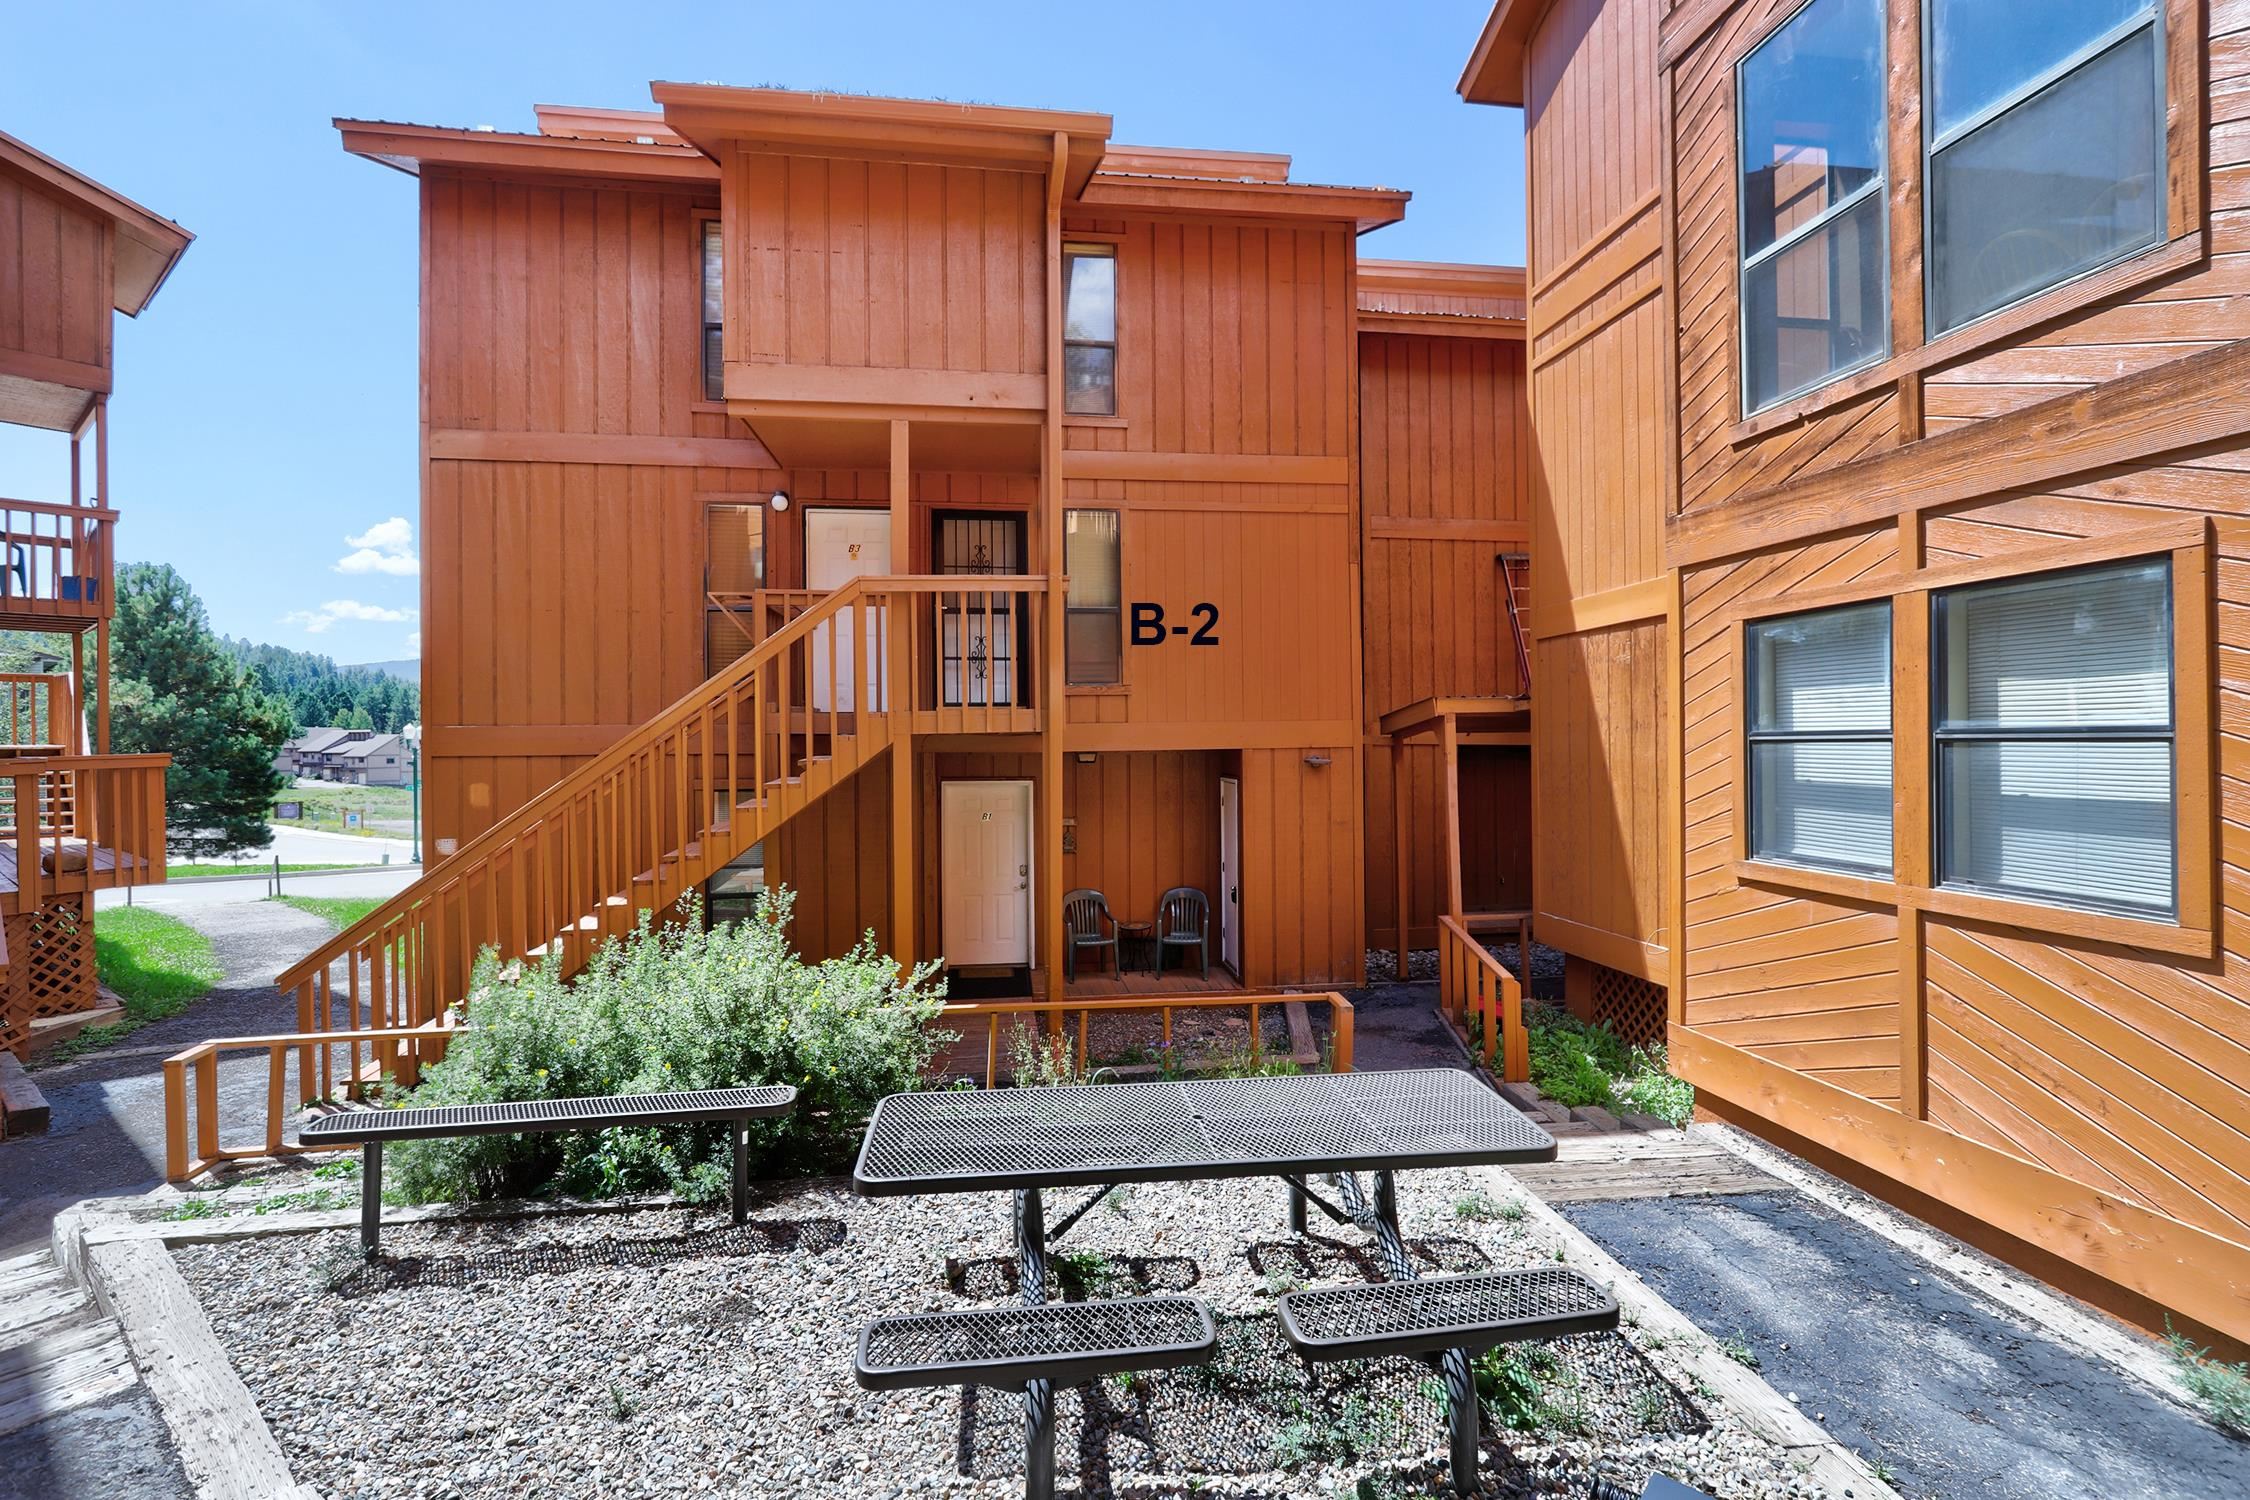 37 Vail Ave, Angel Fire, NM 87710